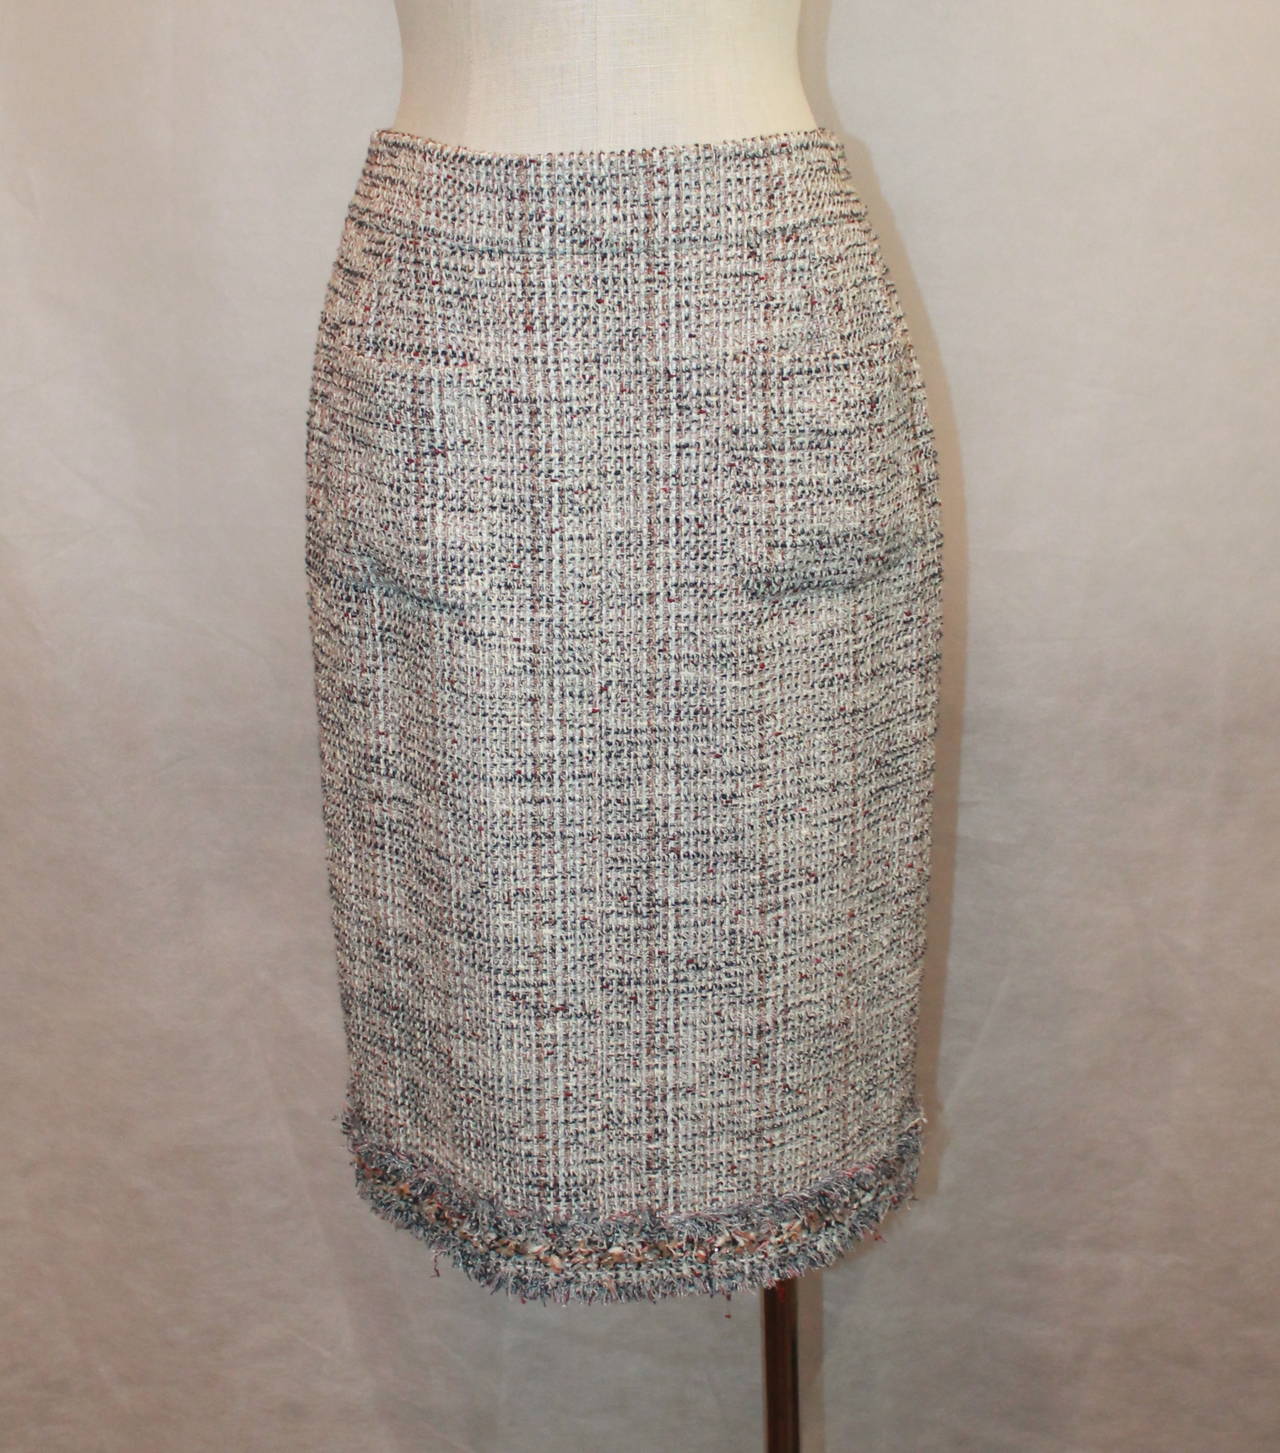 Chanel Beige & Earthtones Tweed 2-Pocket Skirt - 42. This skirt is in excellent condition with a layered fringe trim on the bottom. The tweed is a mix of beige, tan, navy, burgundy, and white. 

Waist- 29.5